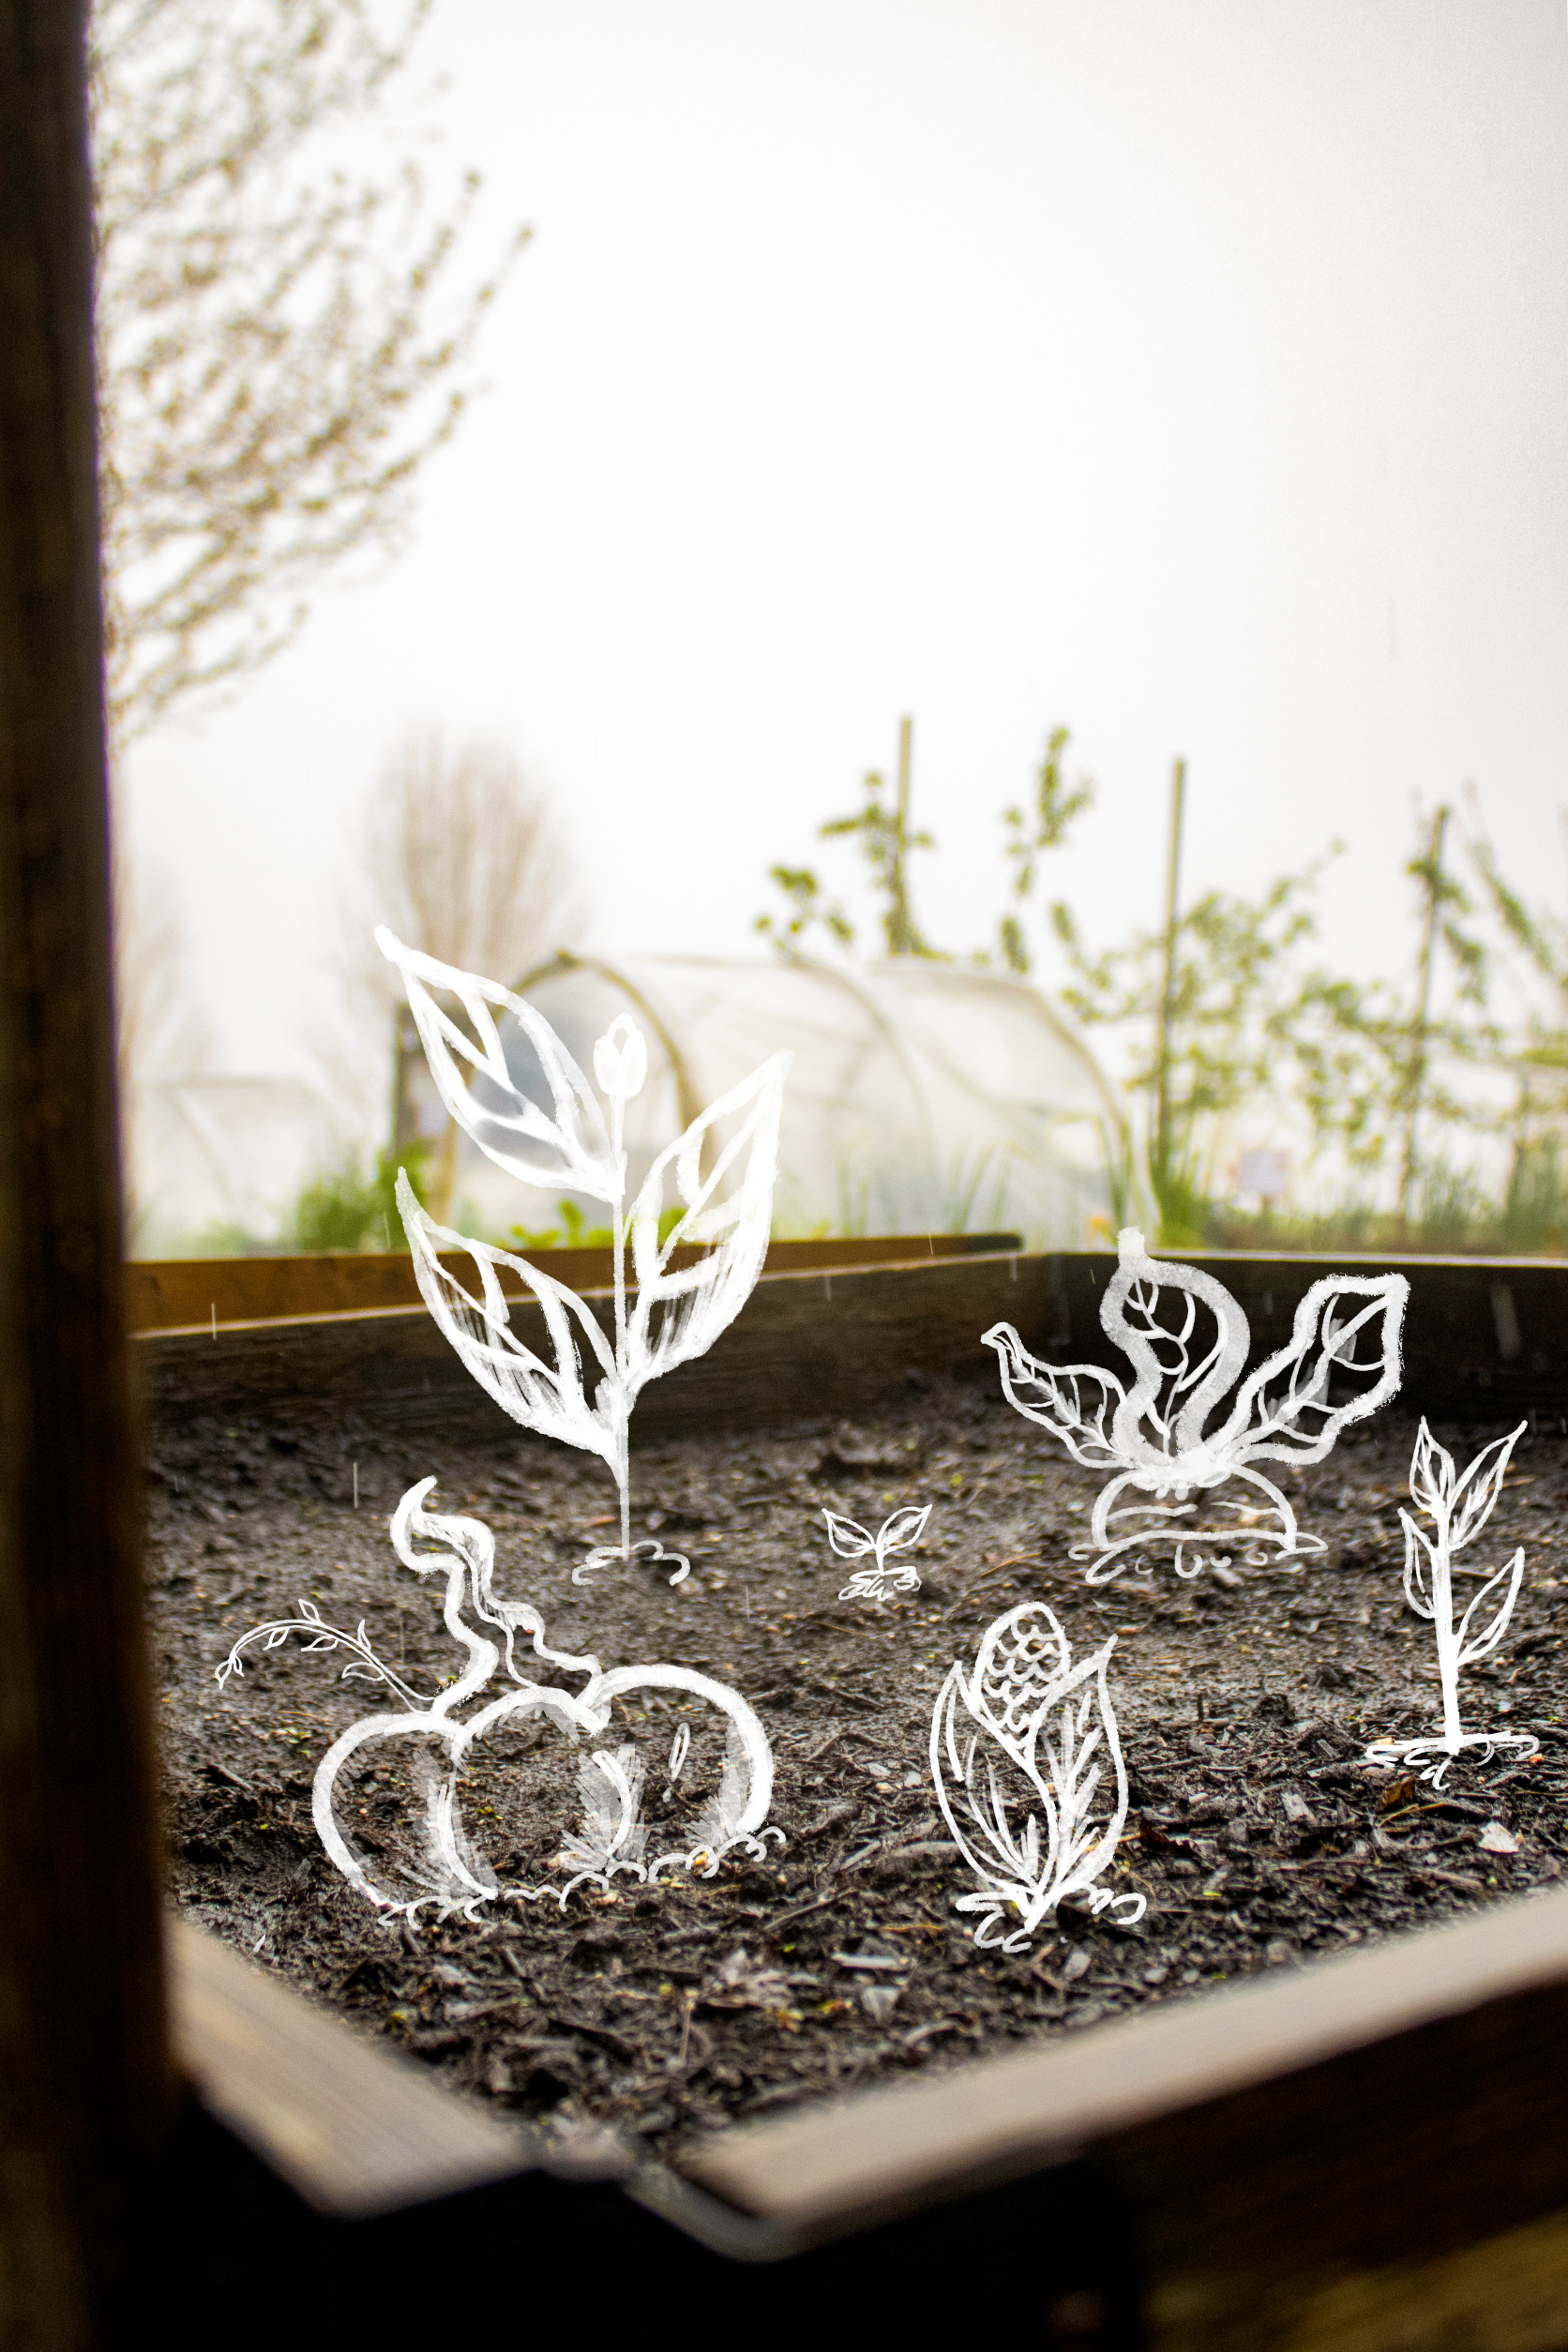 Photo of garden bed filled with soil with white illustrations of plants sprouting out of it